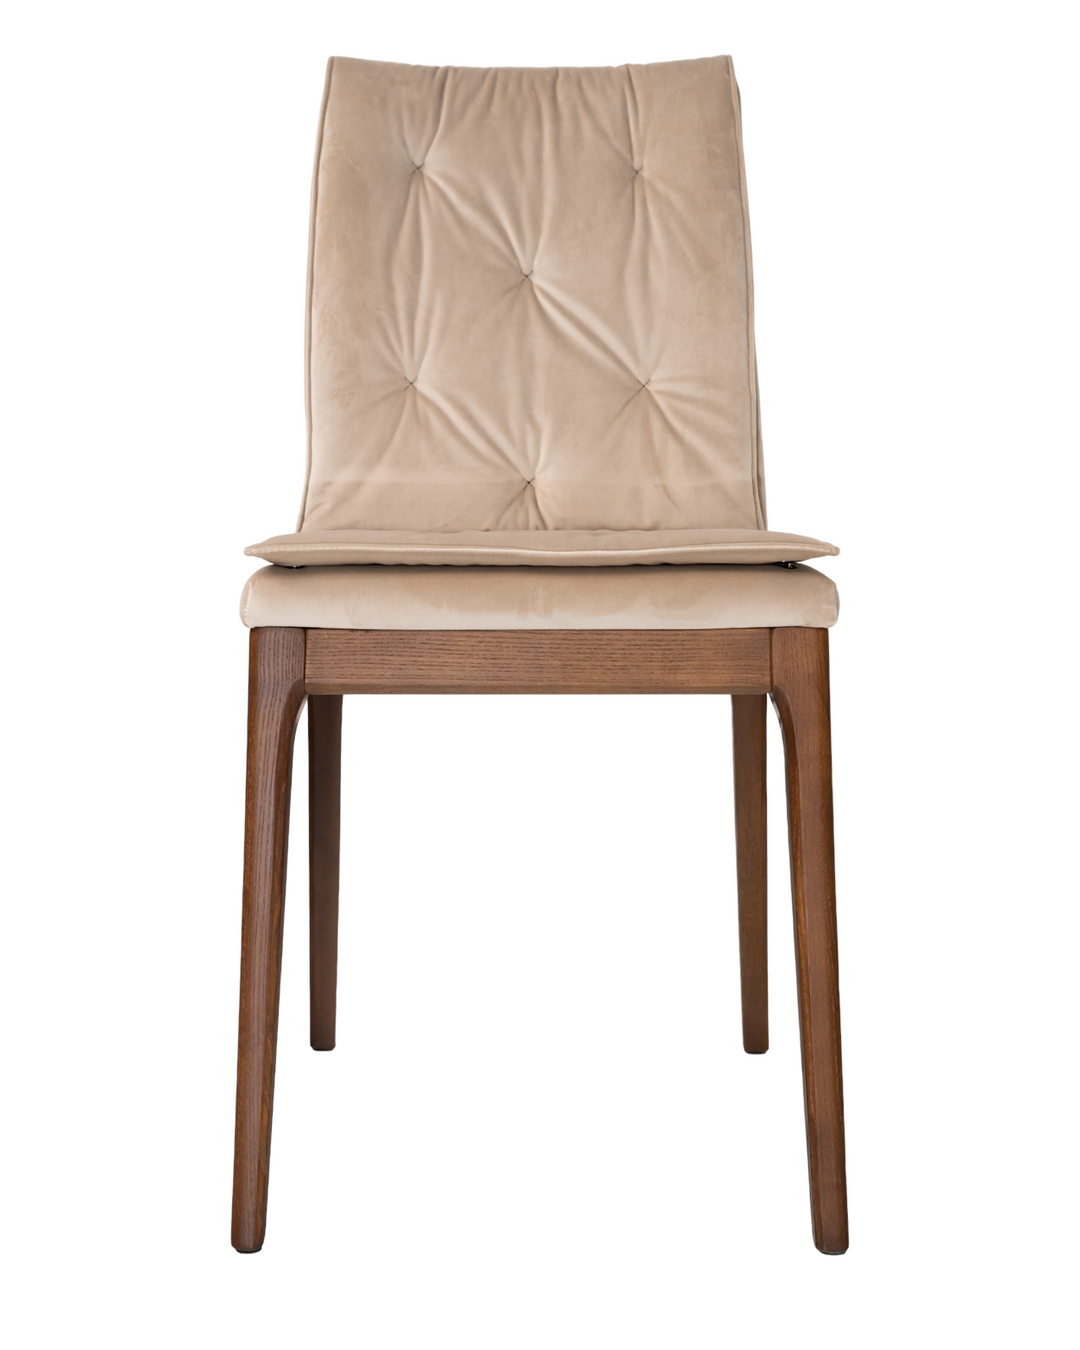 FORTUNADO Dining Chair, set of 2